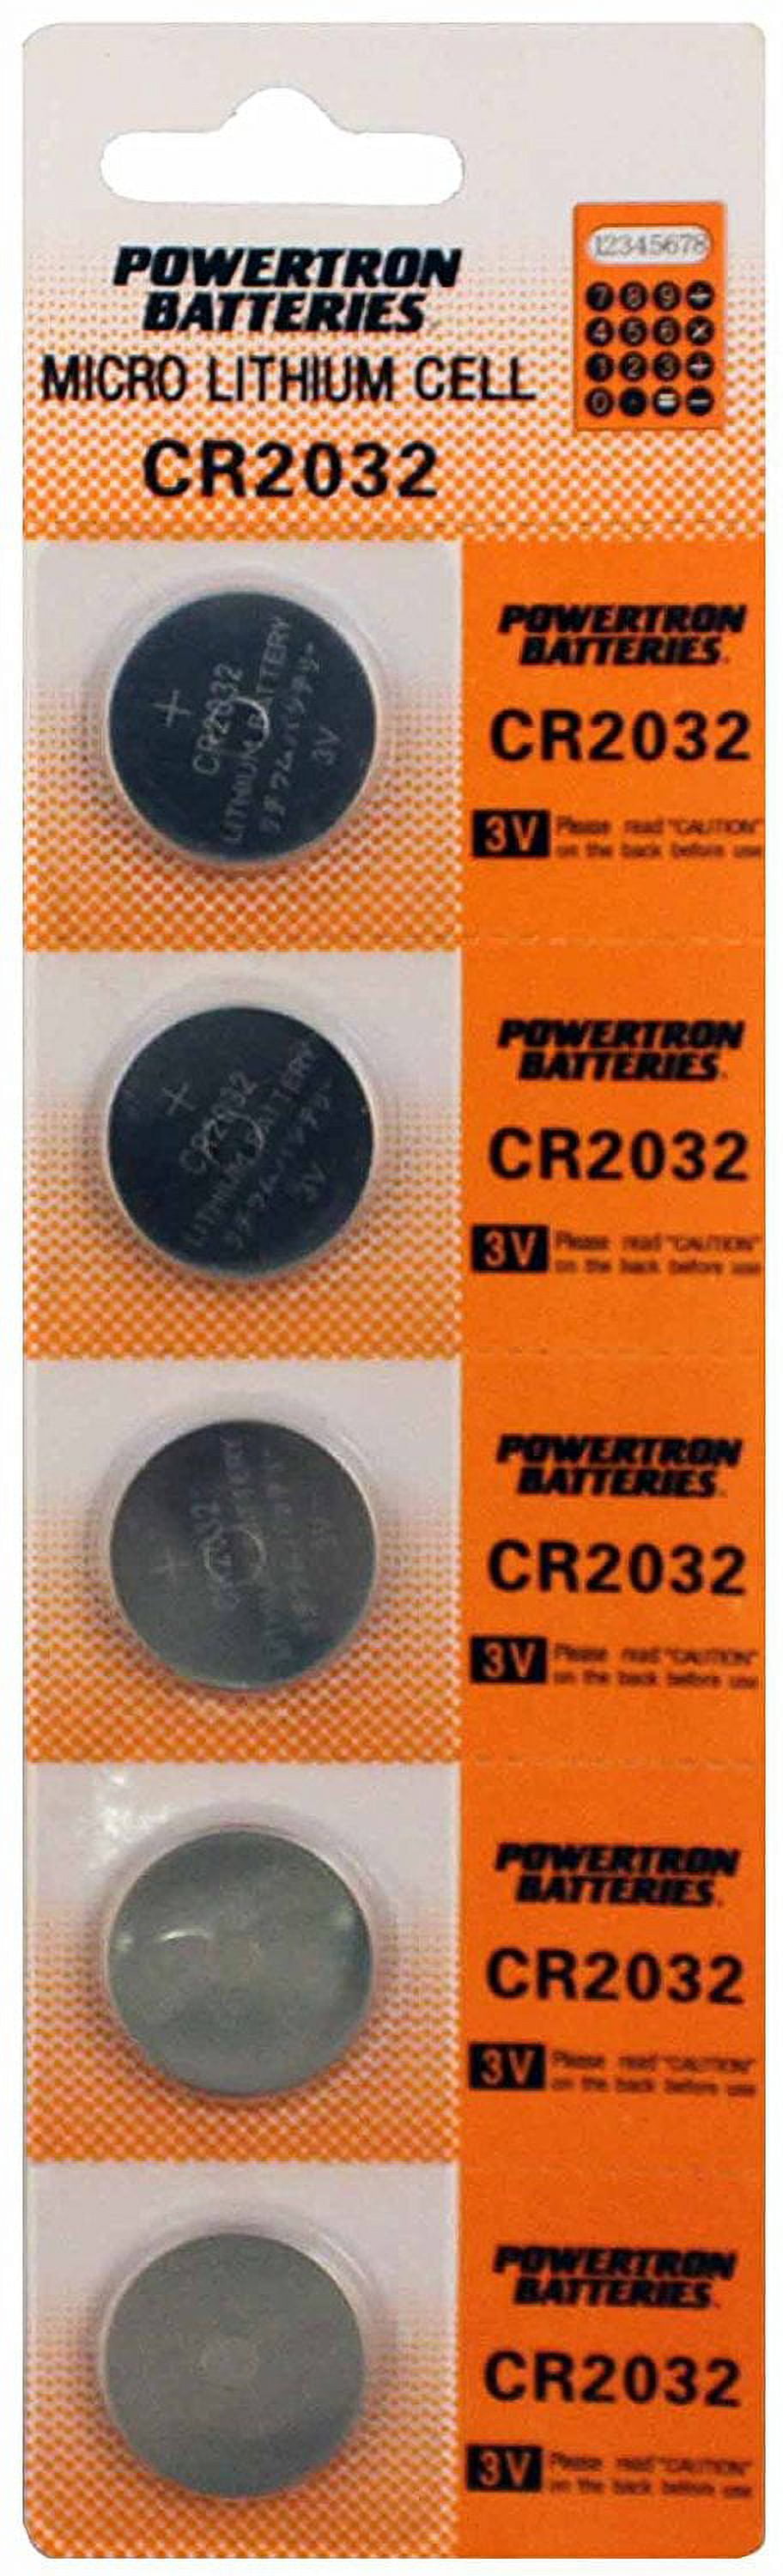 cr2032 coin cells keyless entry remote